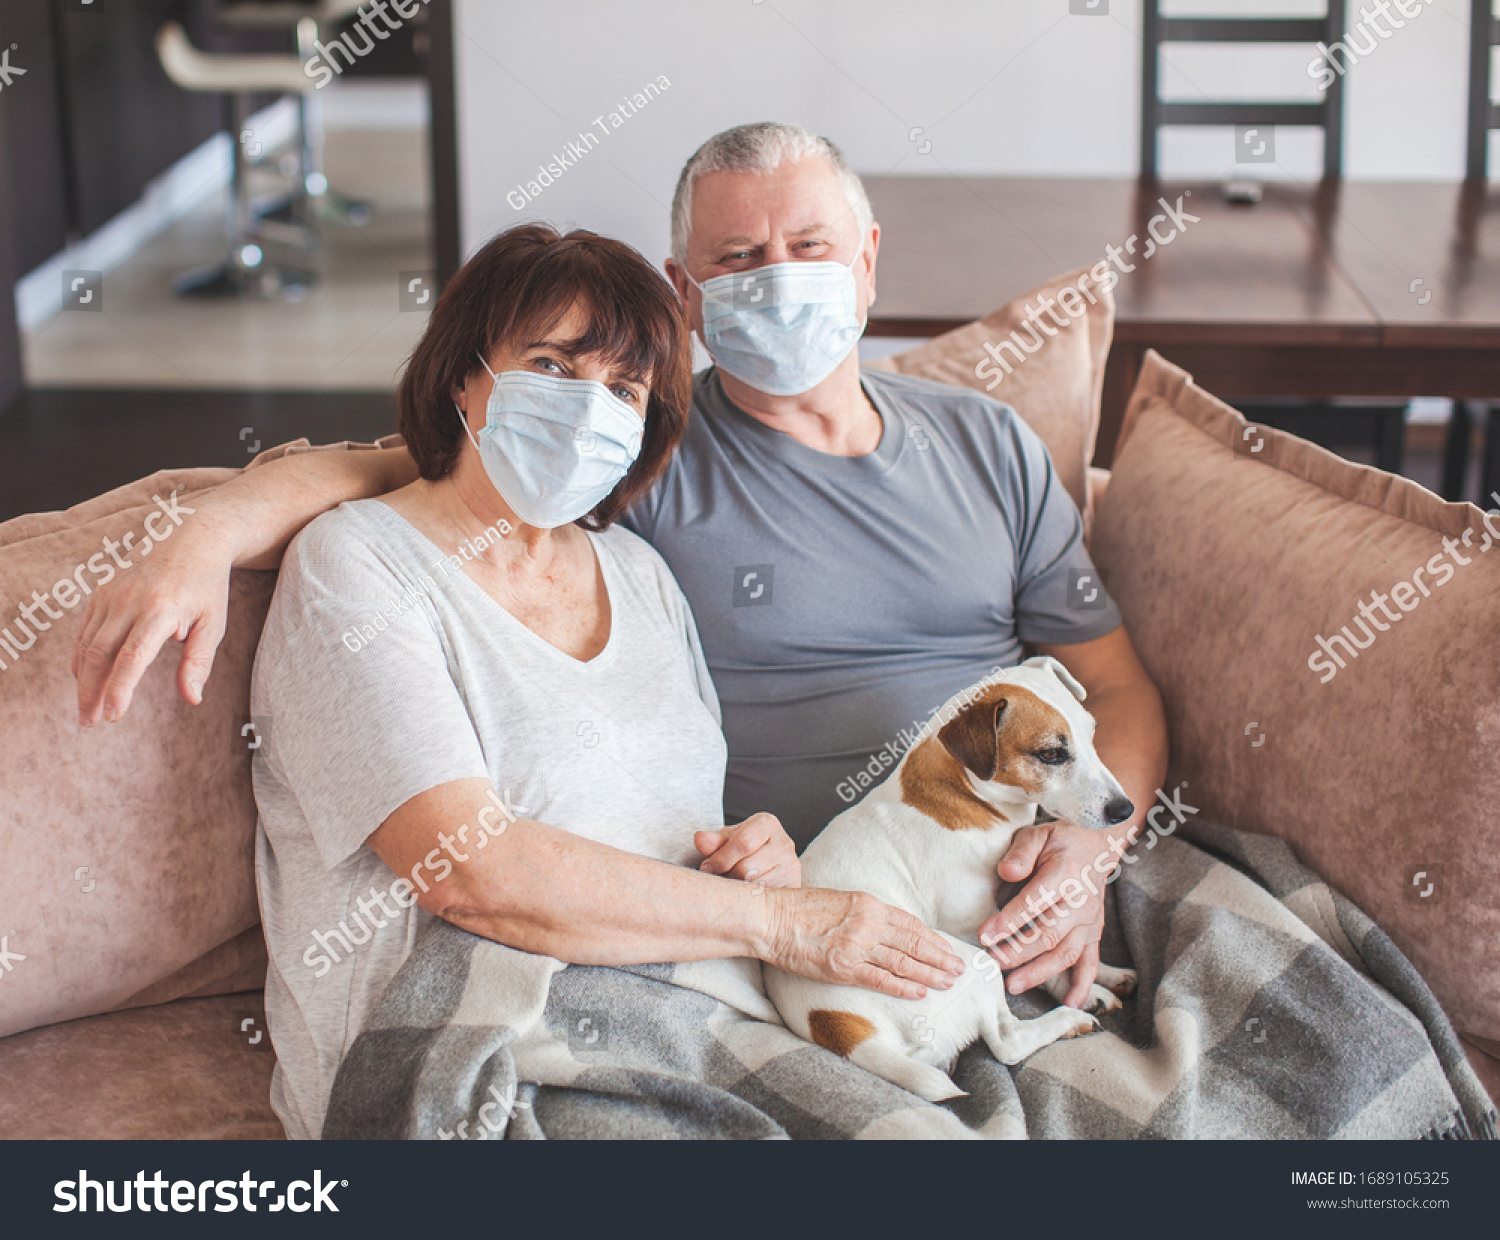 Coronavirus CoVid-19 Couple old aged senior people at home with seasonal winter cold illness disease sit down on the sofa. Elderly couple in medical masks during the pandemic #1689105325